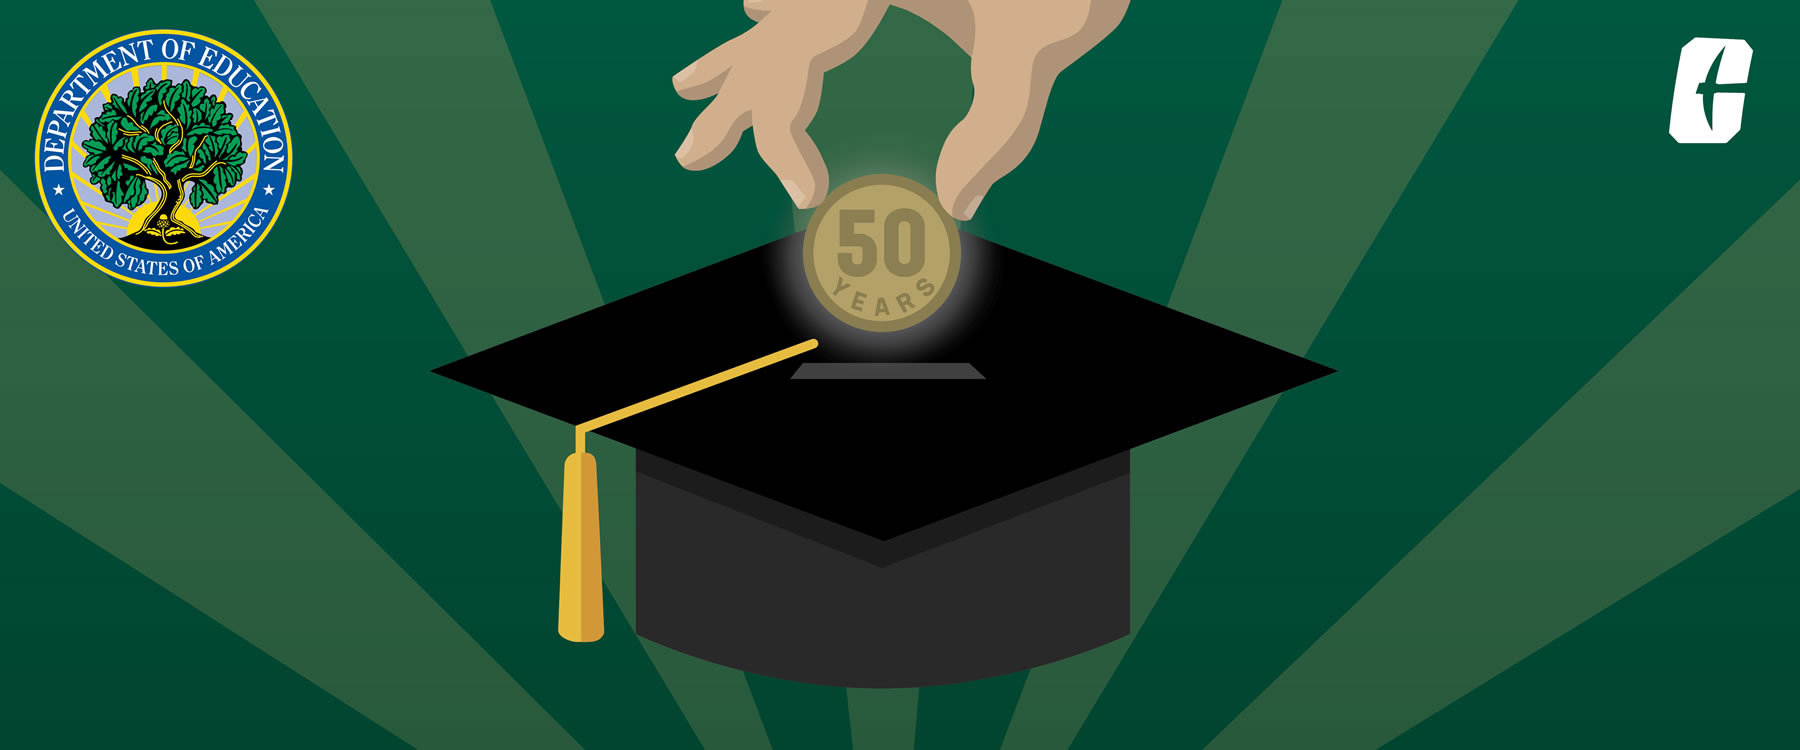 A half-century of access: The Federal Pell Grant Program turns 50